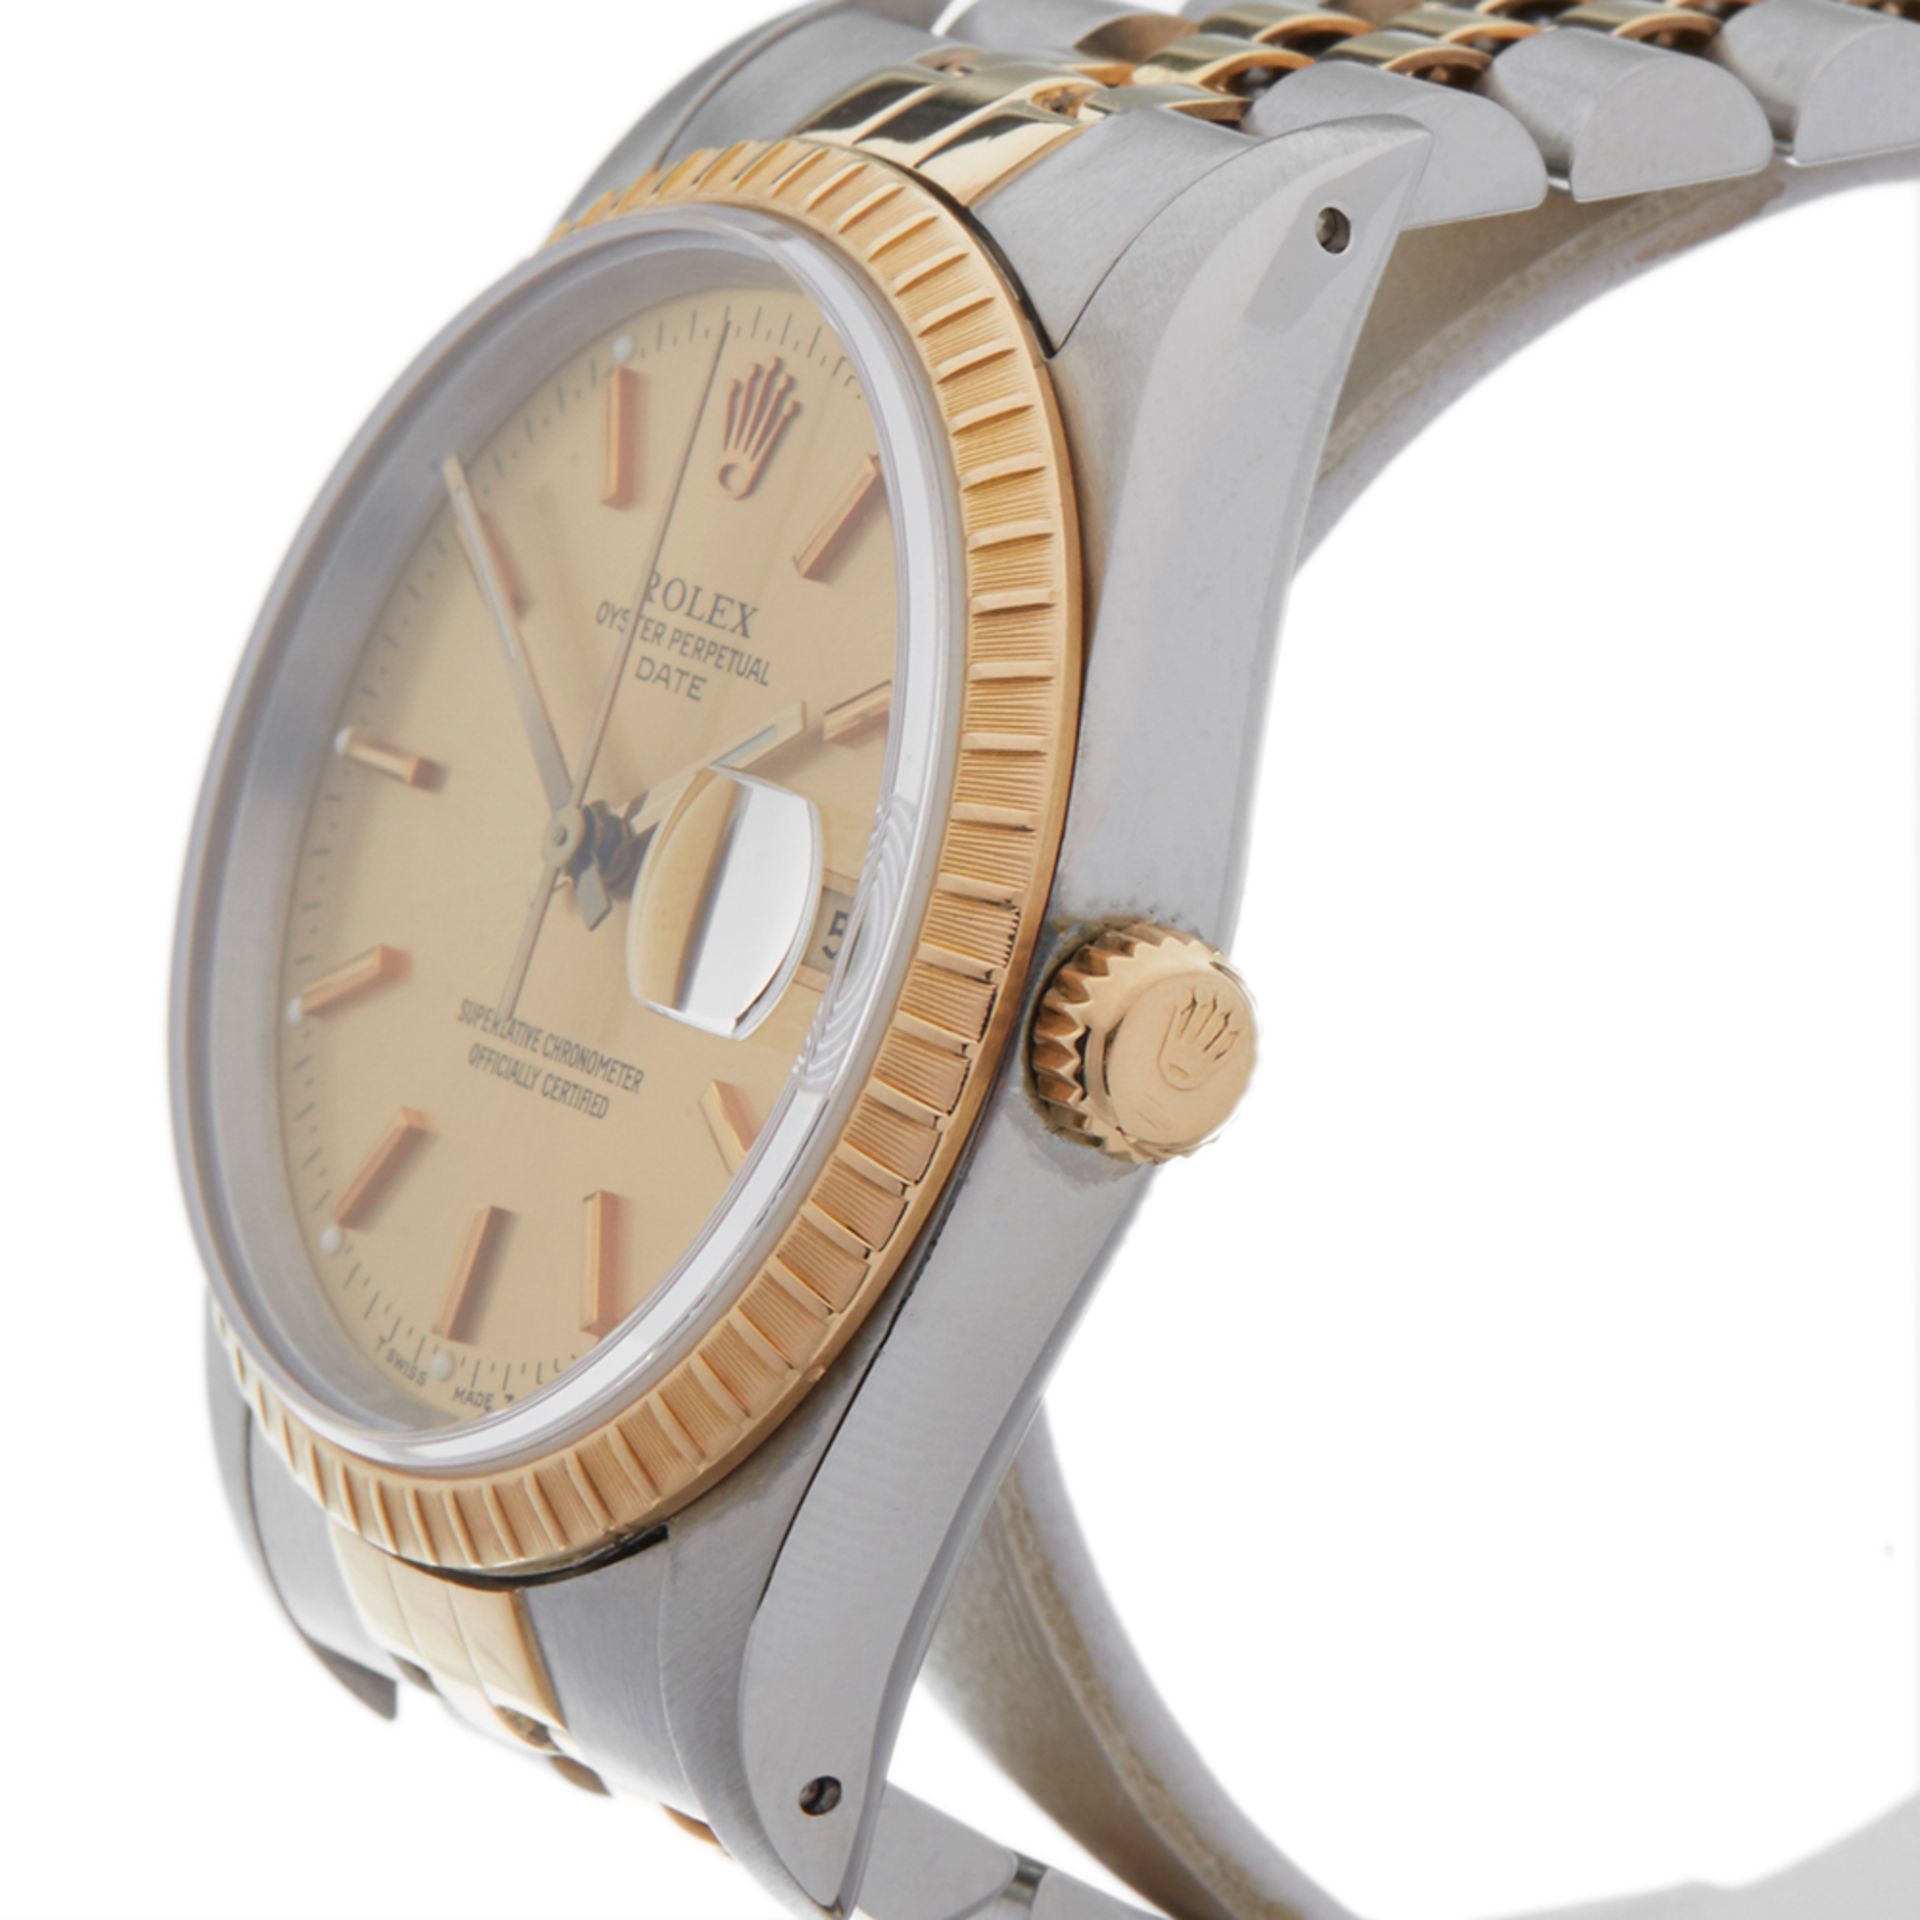 Oyster Perpetual Date 36mm Stainless Steel & 18k Yellow Gold - 15233 - Image 4 of 8